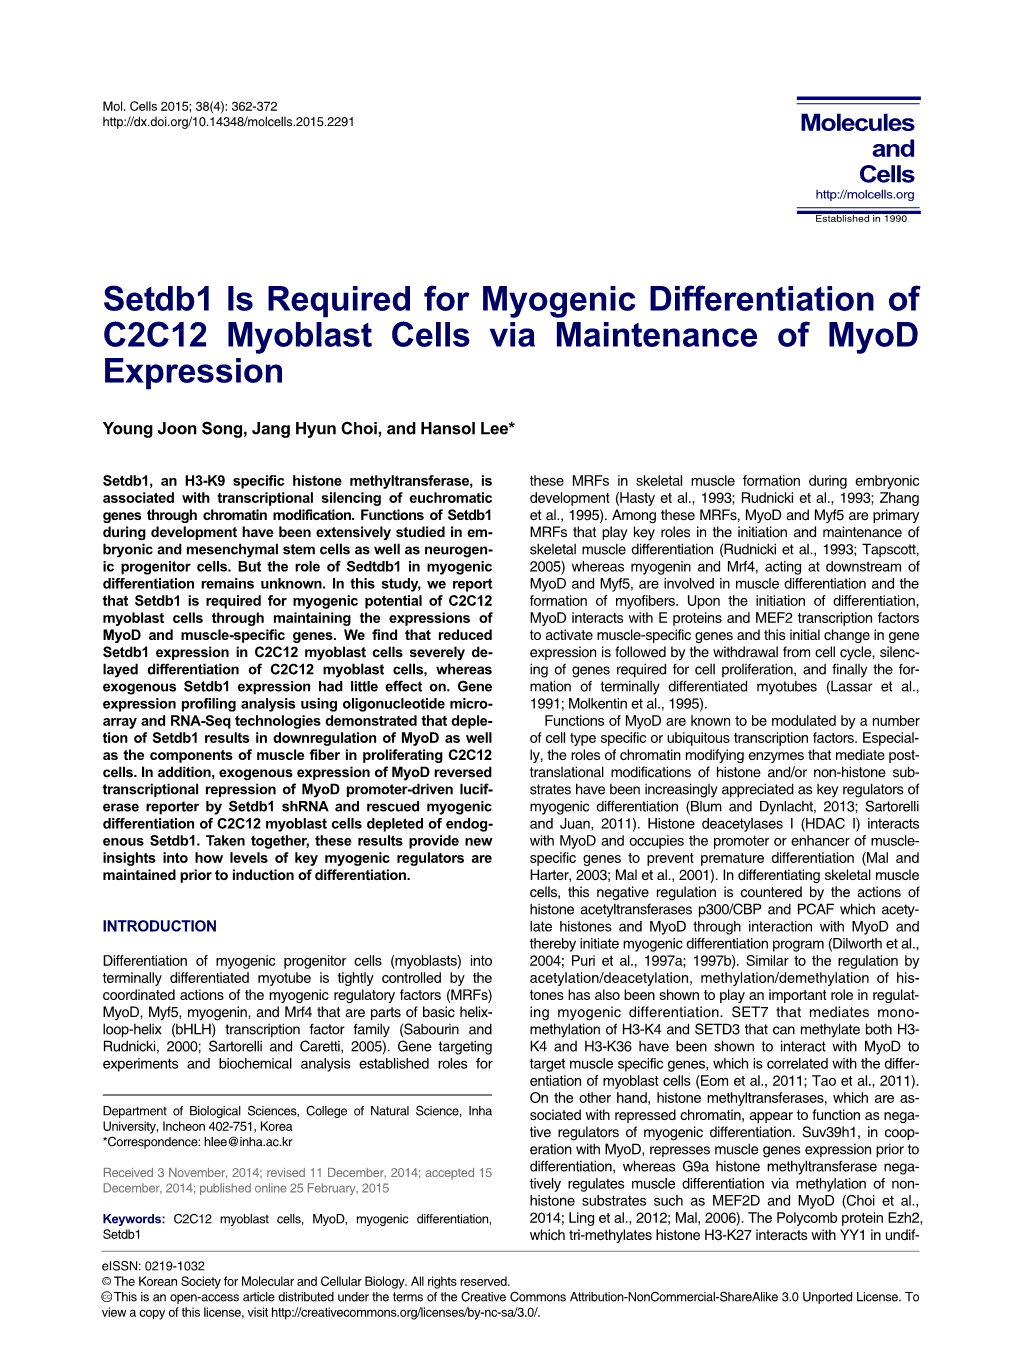 Setdb1 Is Required for Myogenic Differentiation of C2C12 Myoblast Cells Via Maintenance of Myod Expression